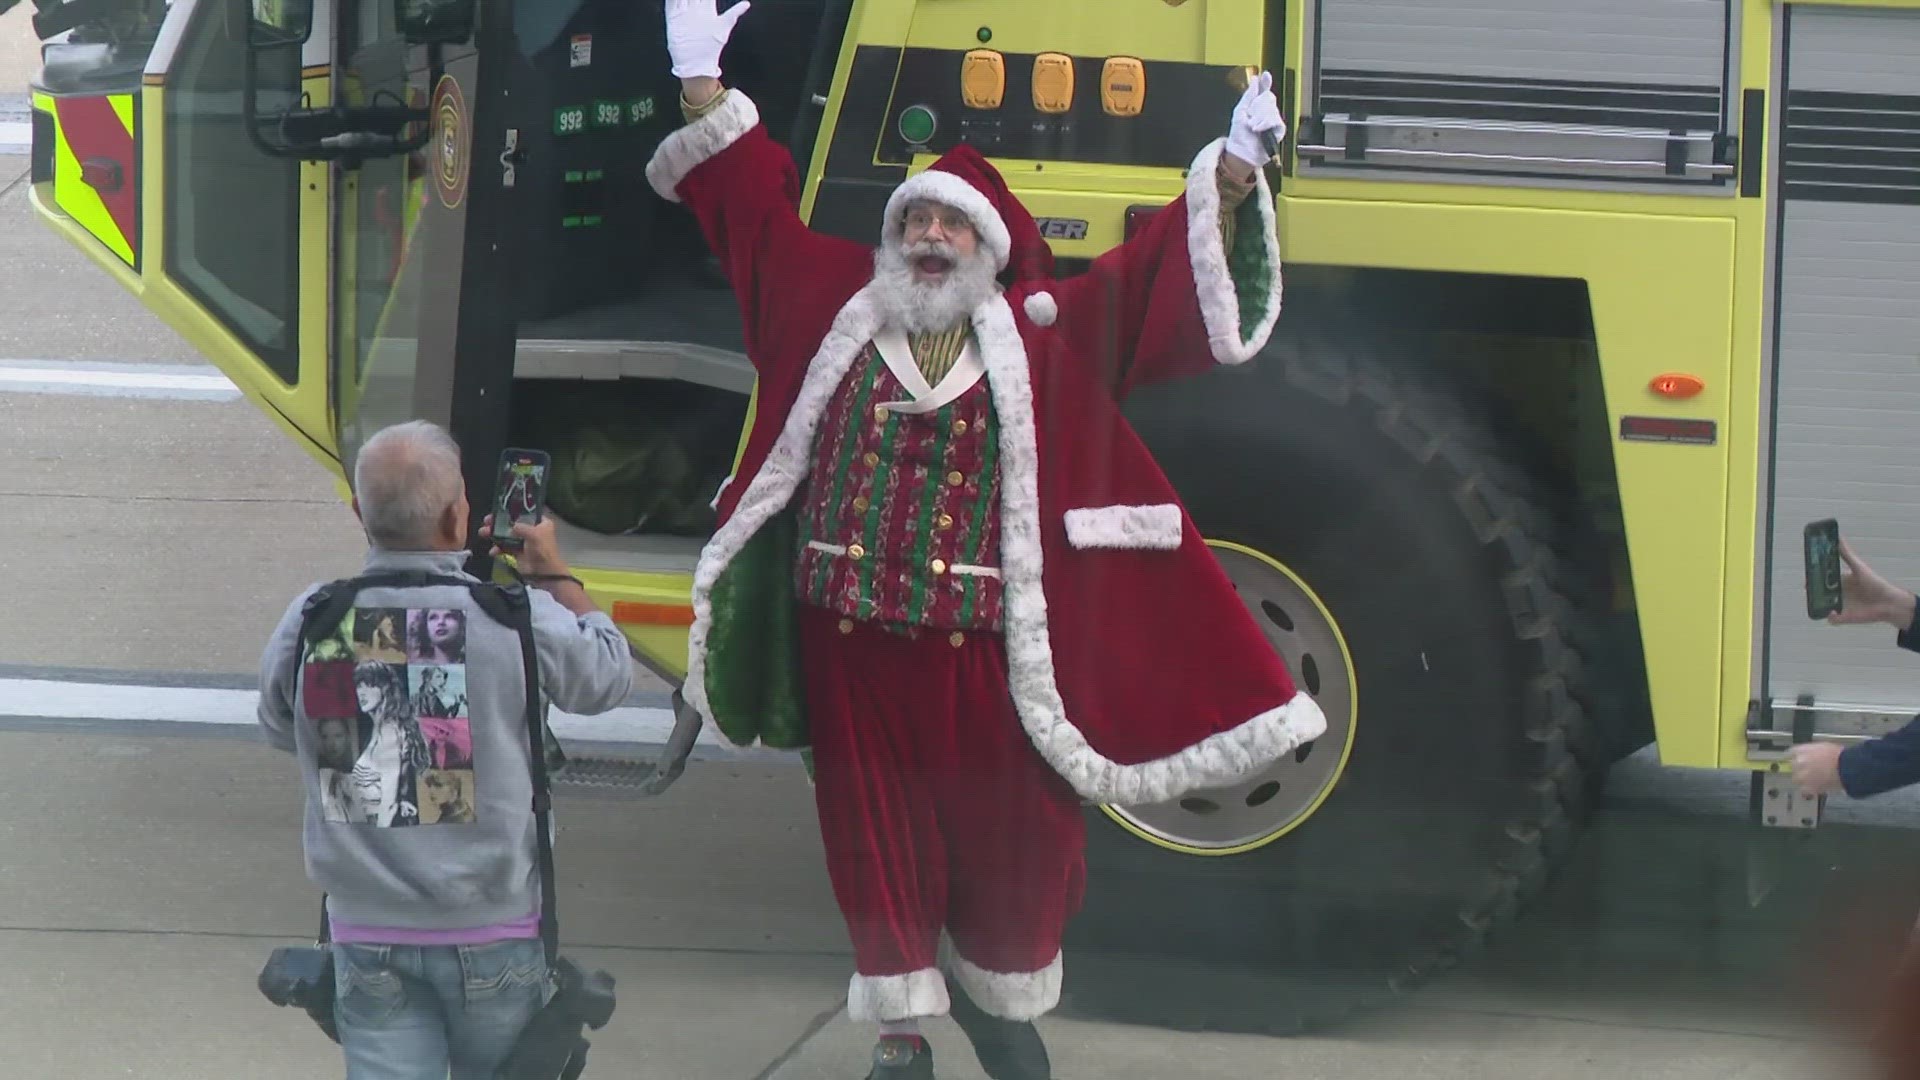 Santa showed up ready to greet more than 1,000 Hoosier families and children at the annual "Holly Jolly Jetway" event.